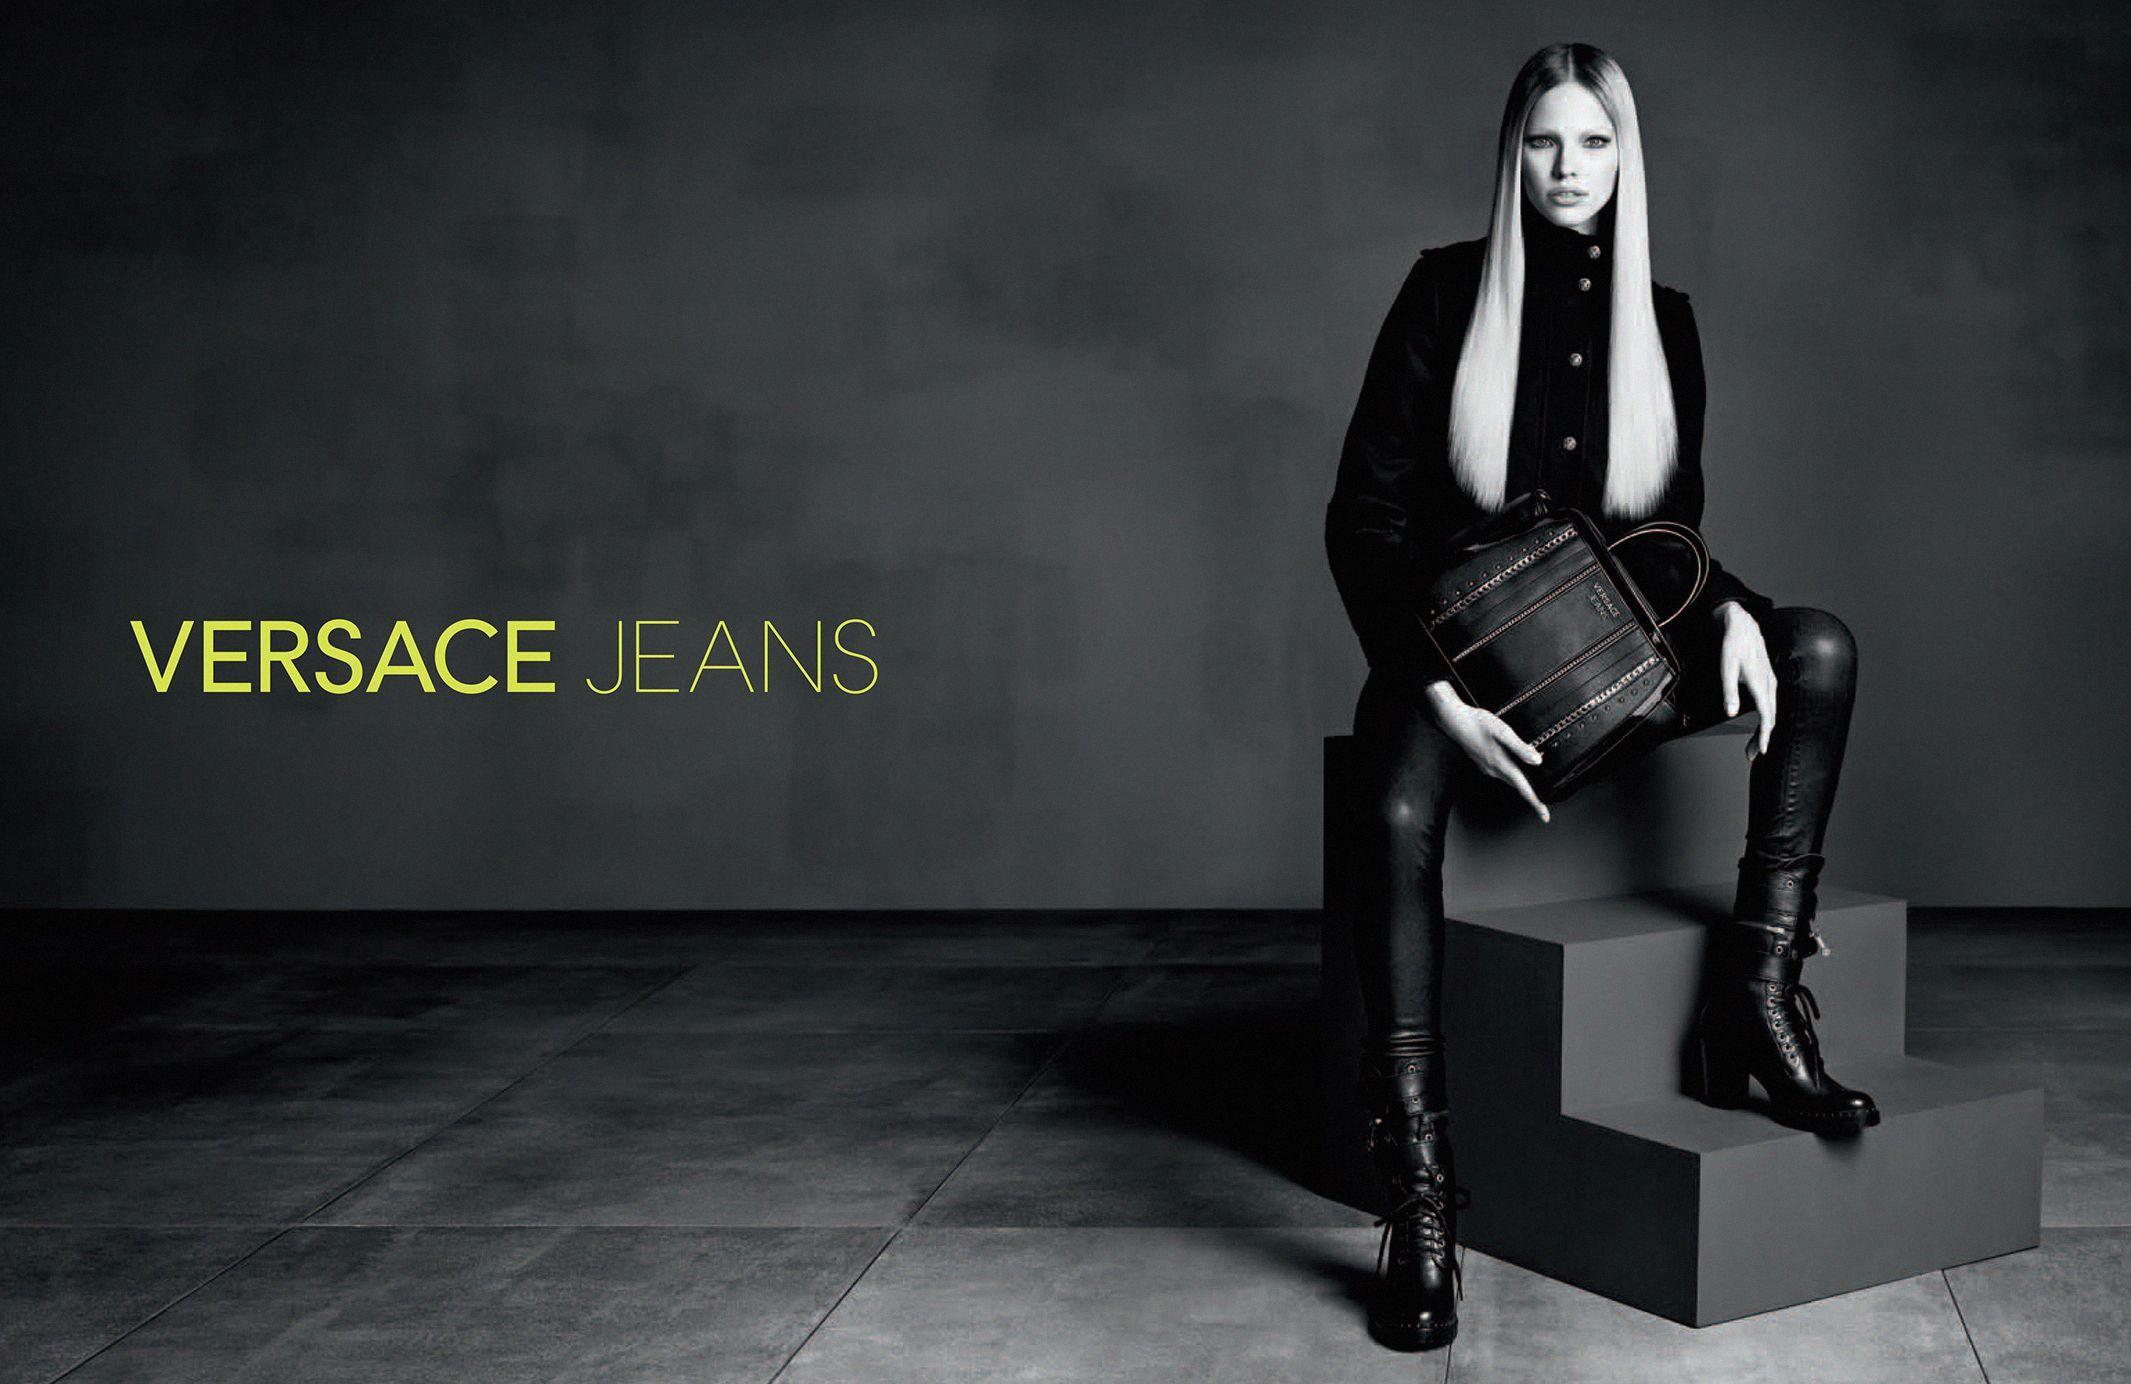 Girl in jeans by Versace wallpaper and image